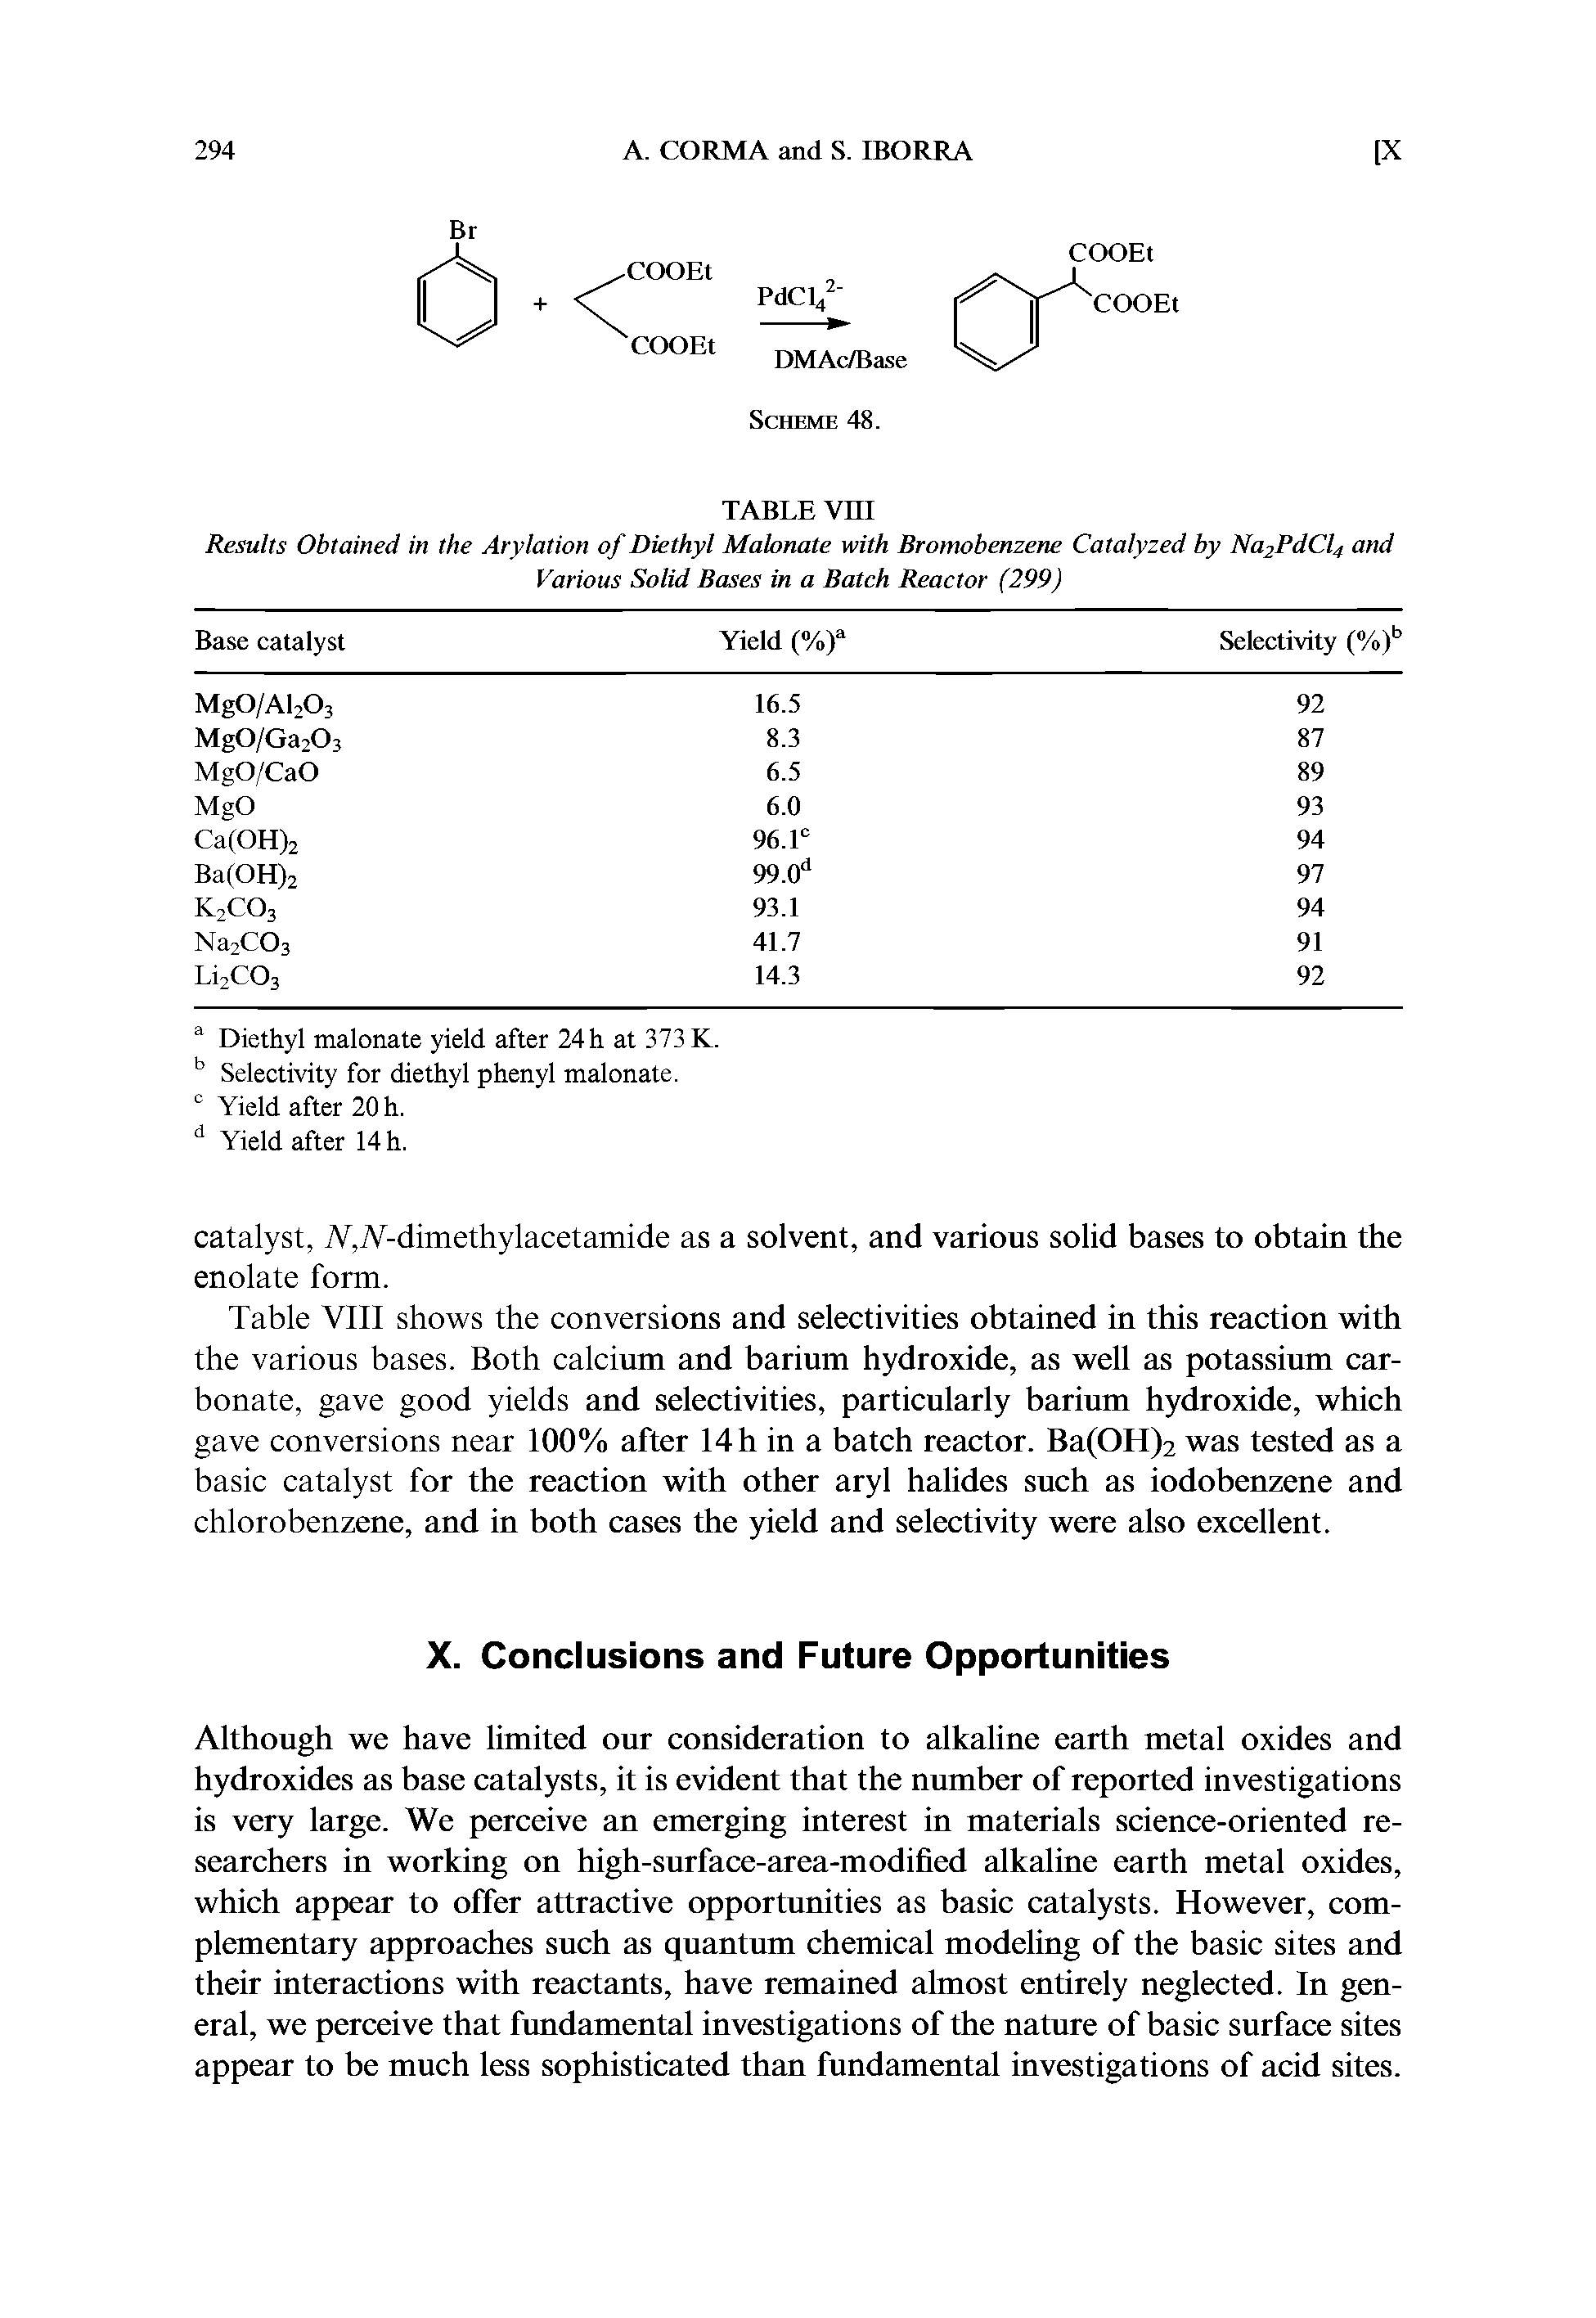 Table VIII shows the conversions and selectivities obtained in this reaction with the various bases. Both calcium and barium hydroxide, as well as potassium carbonate, gave good yields and selectivities, particularly barium hydroxide, which gave conversions near 100% after 14h in a batch reactor. Ba(OH)2 was tested as a basic catalyst for the reaction with other aryl halides such as iodobenzene and chlorobenzene, and in both cases the yield and selectivity were also excellent.